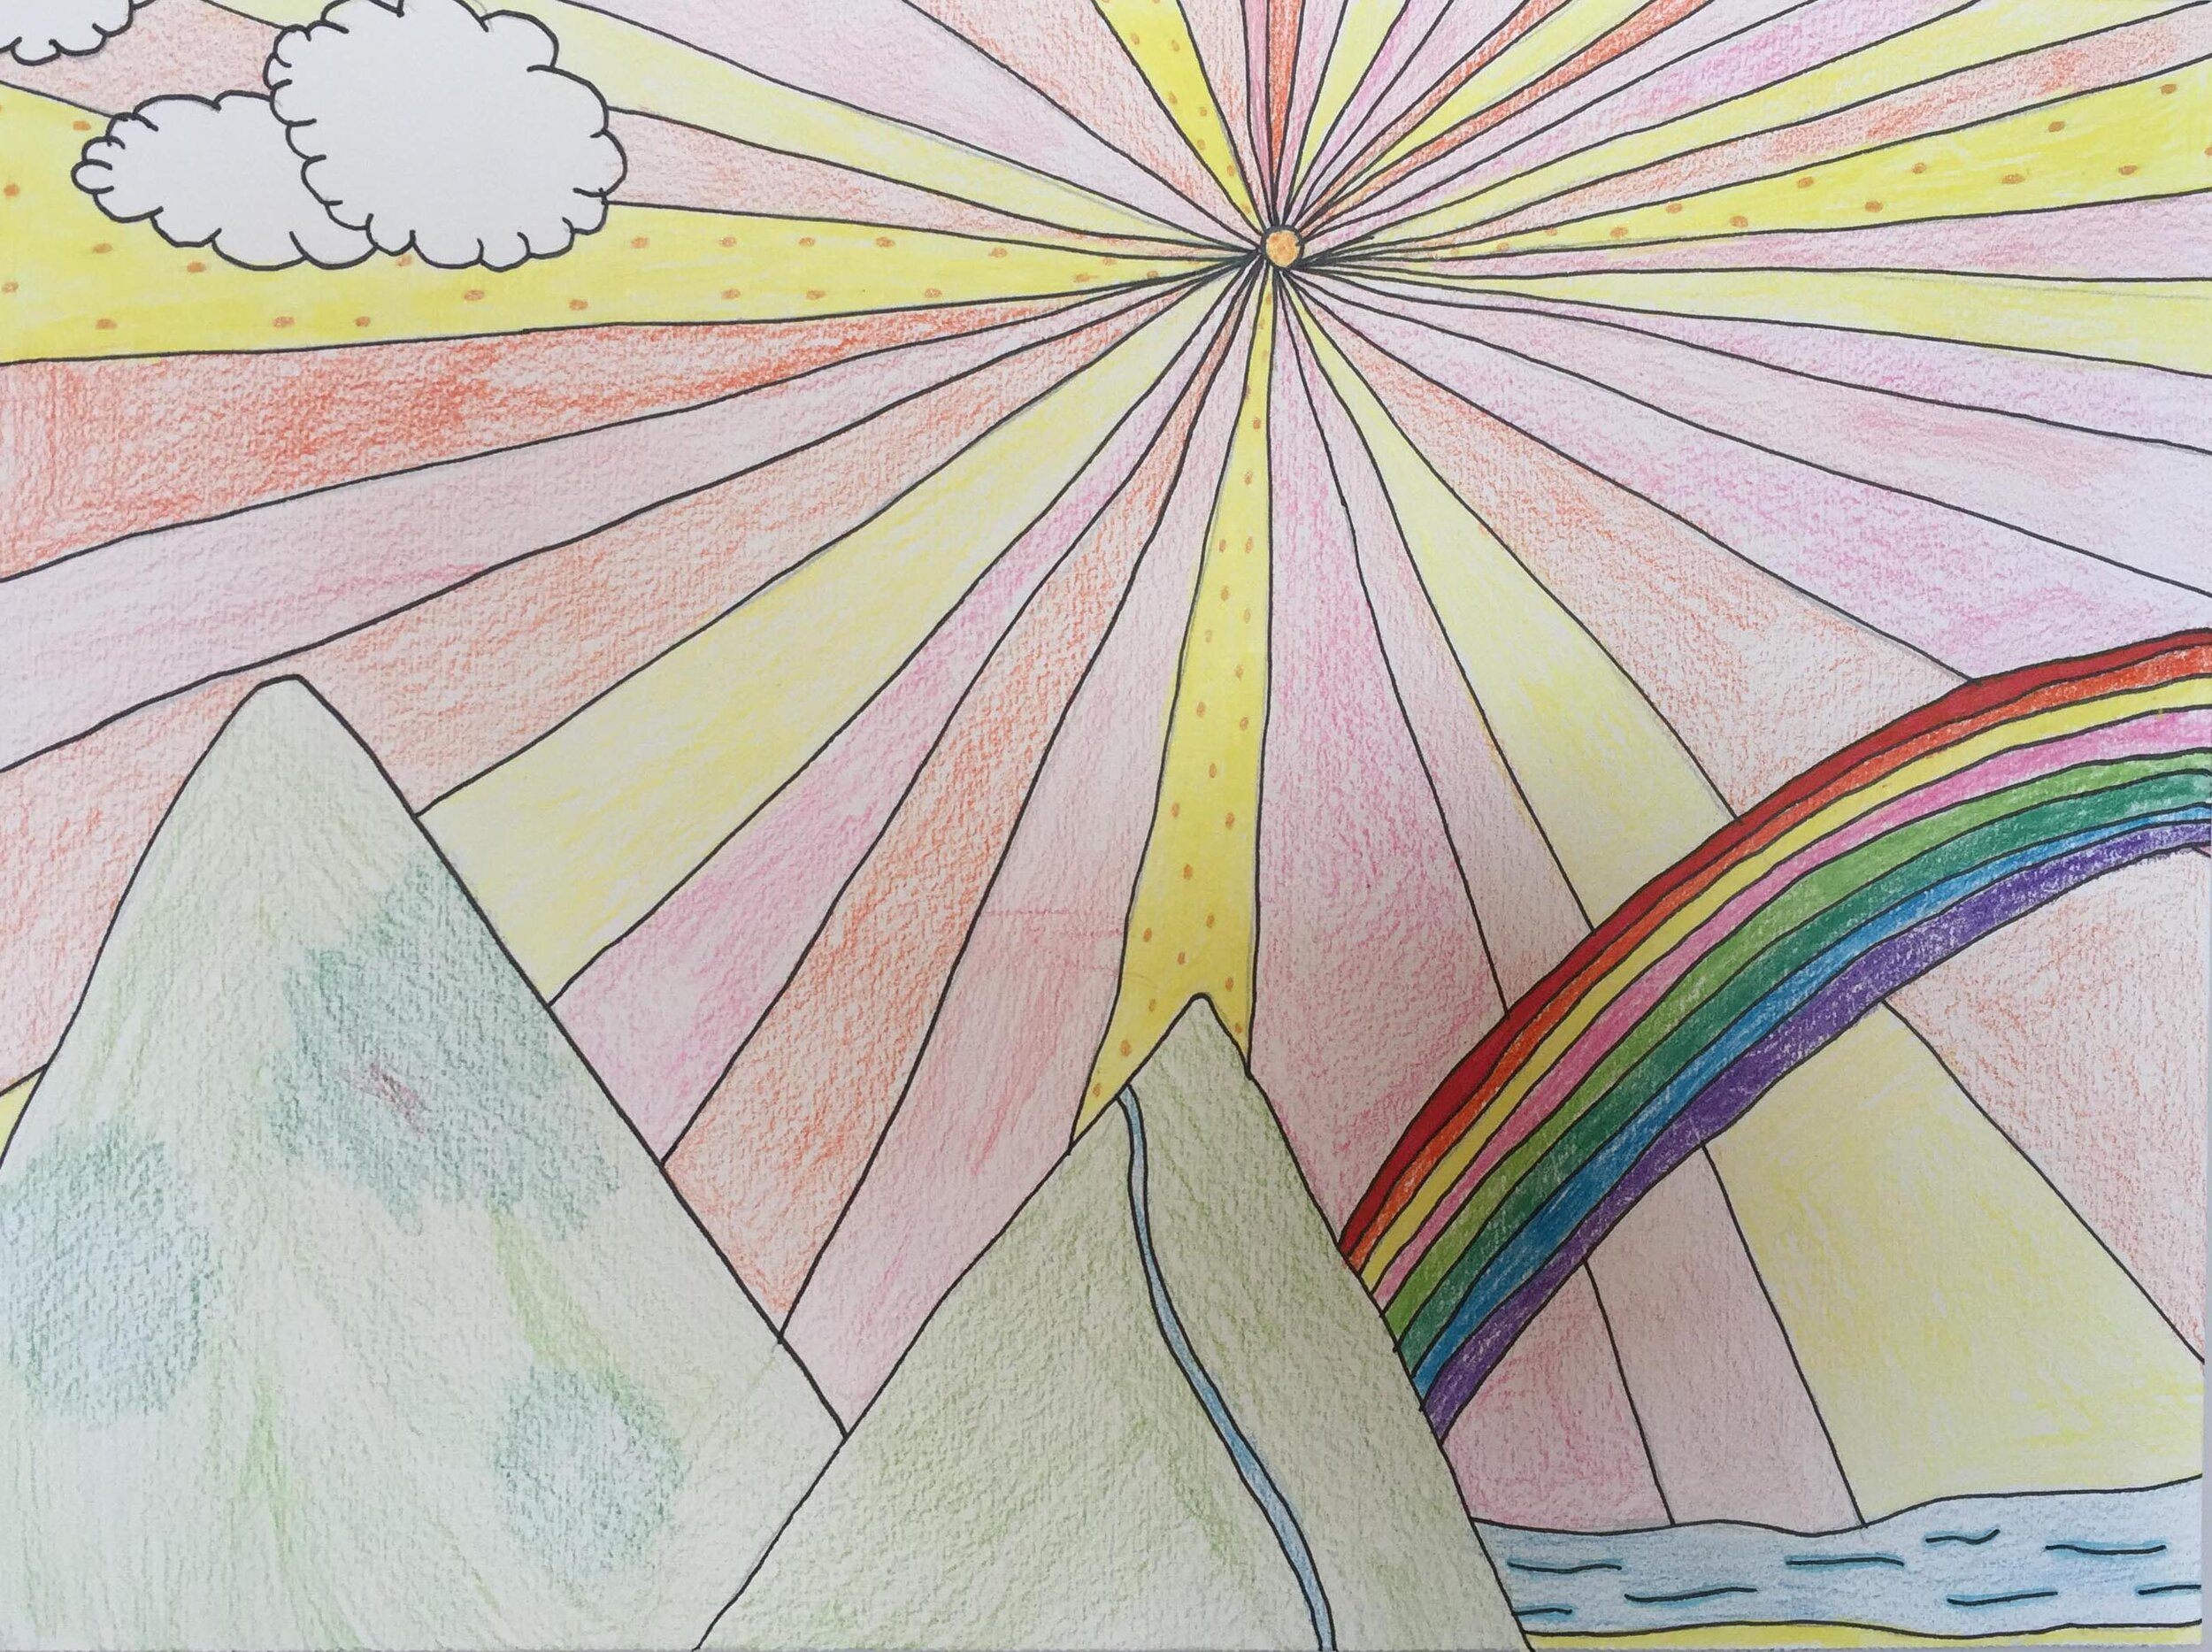 Rainbow by Sunset by Neave Gauld age 8